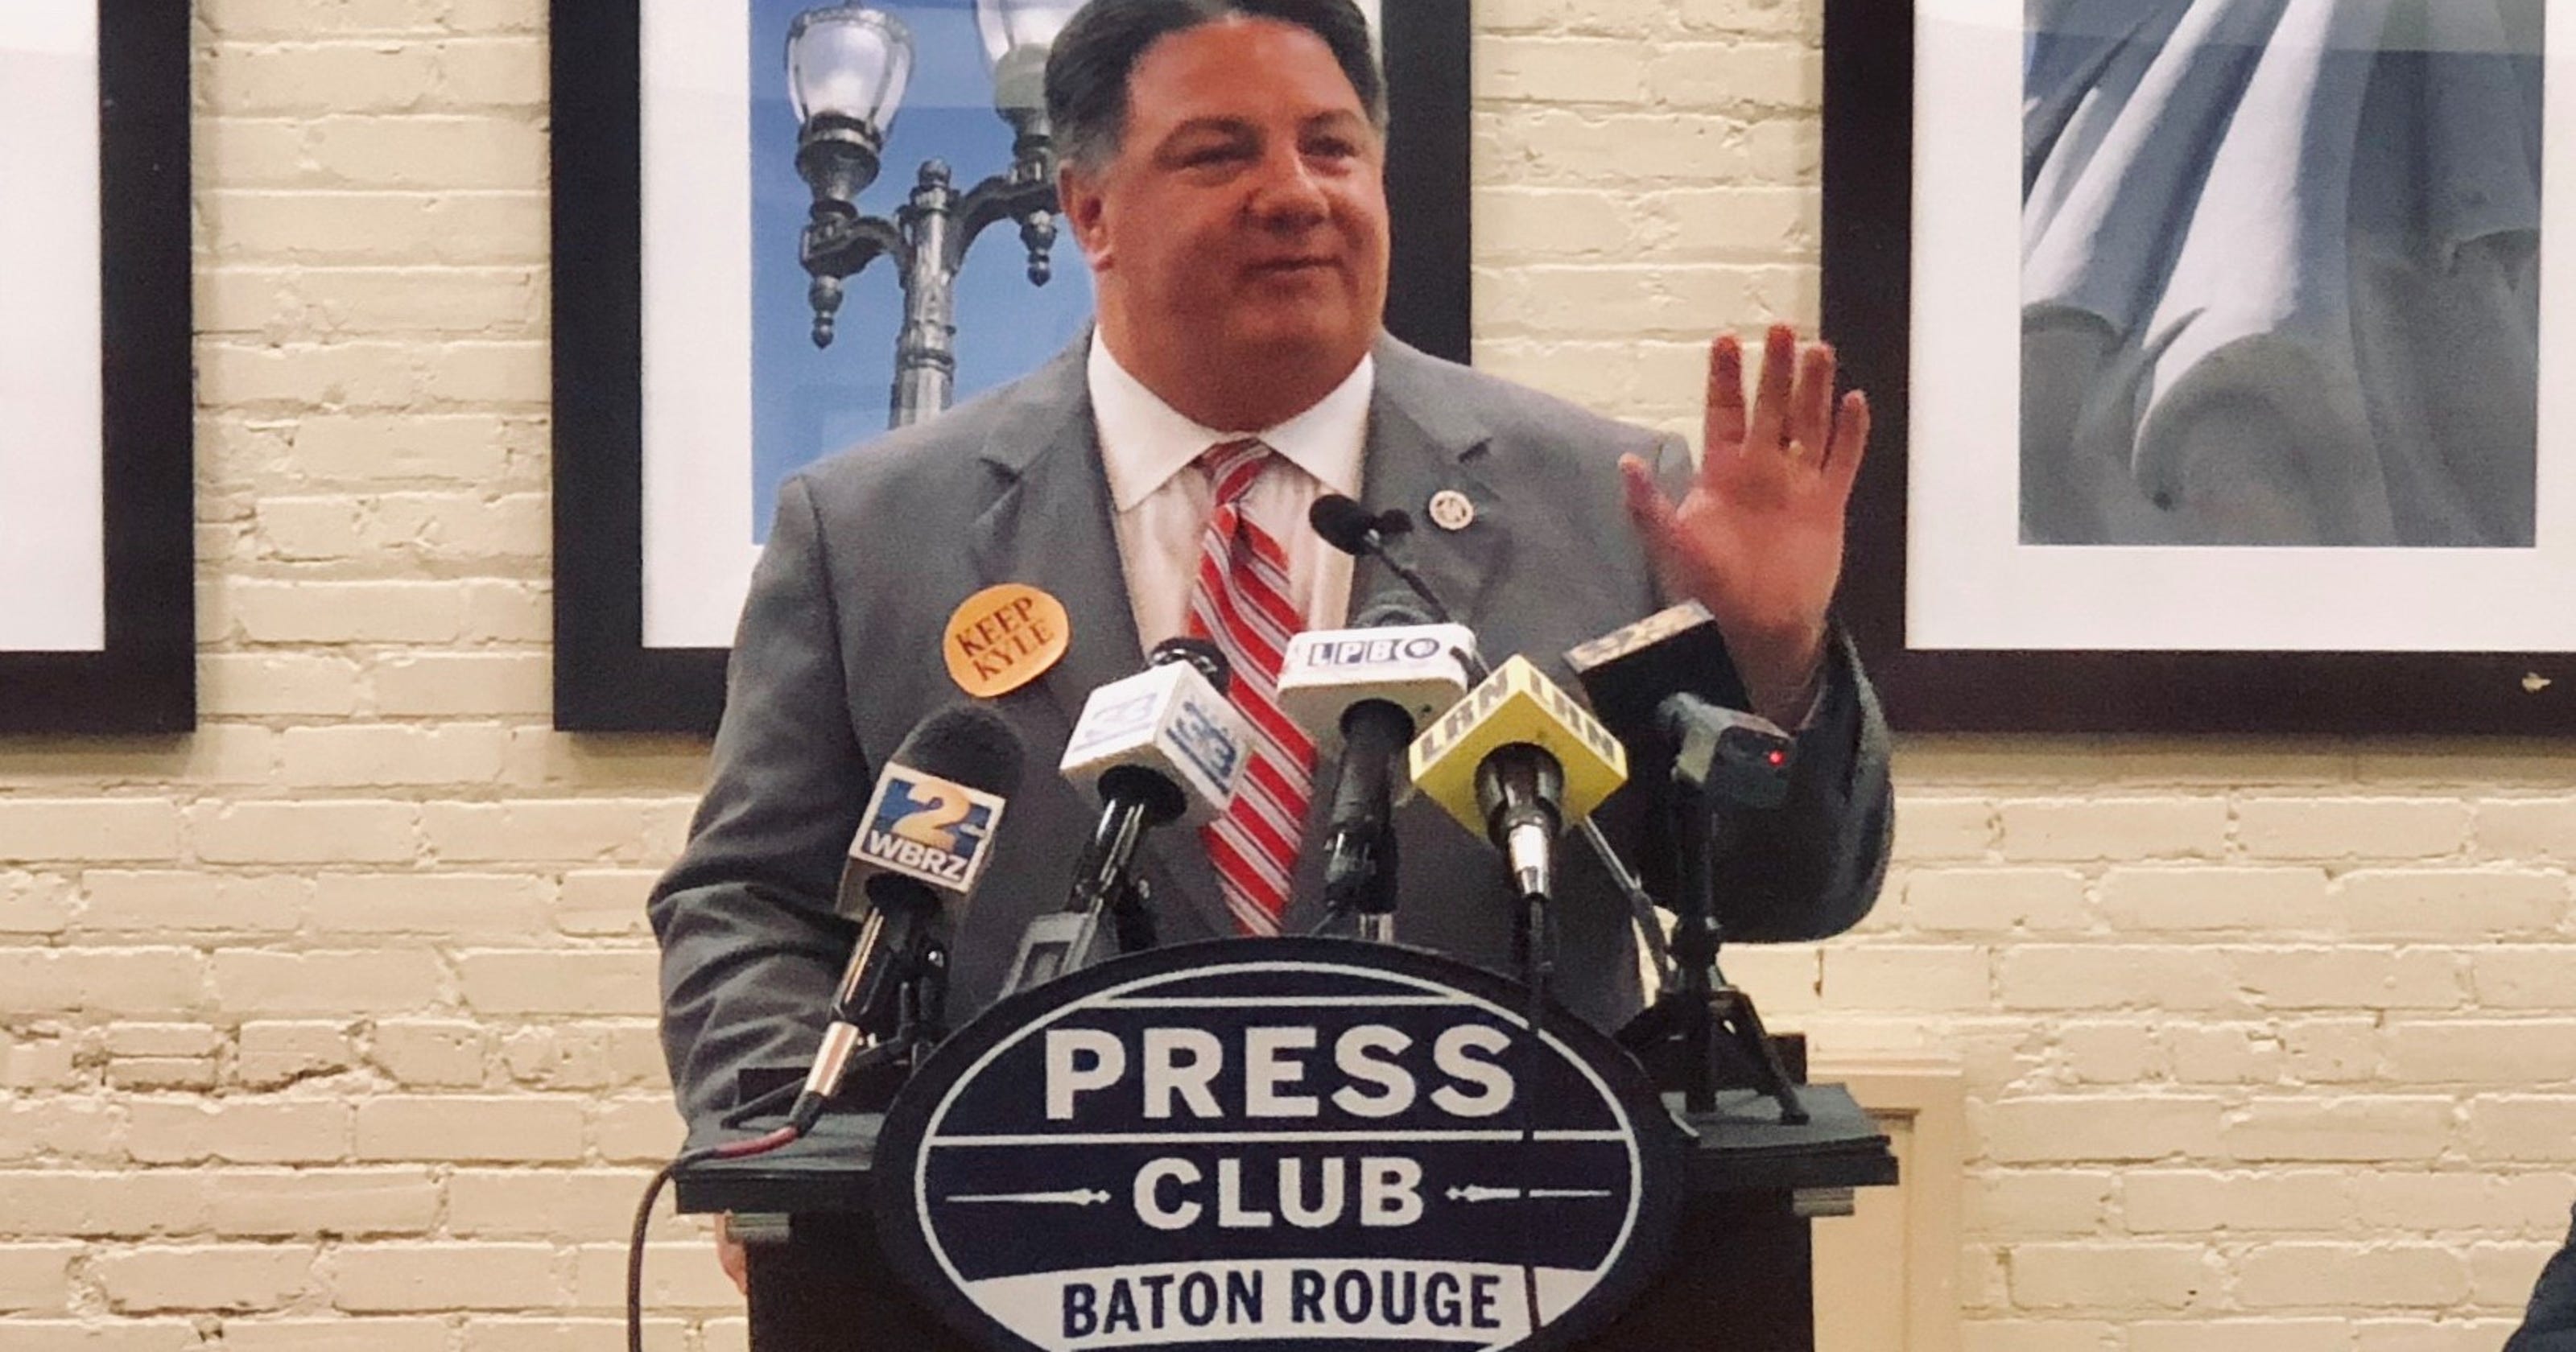 Louisiana Secretary of state race turns sour by Election Day